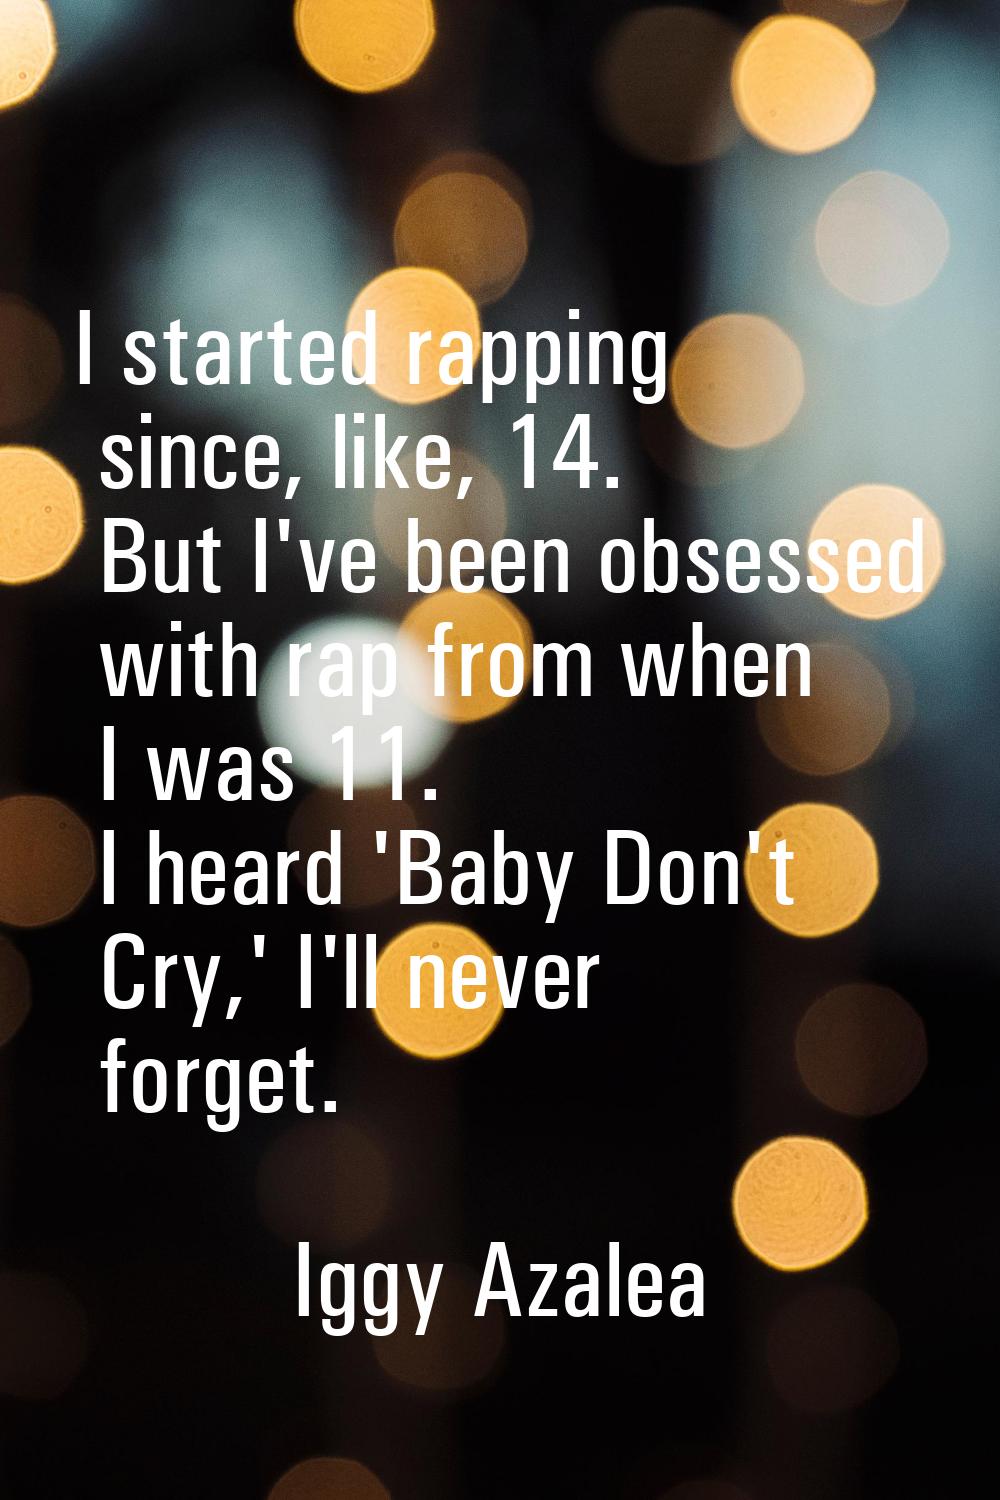 I started rapping since, like, 14. But I've been obsessed with rap from when I was 11. I heard 'Bab